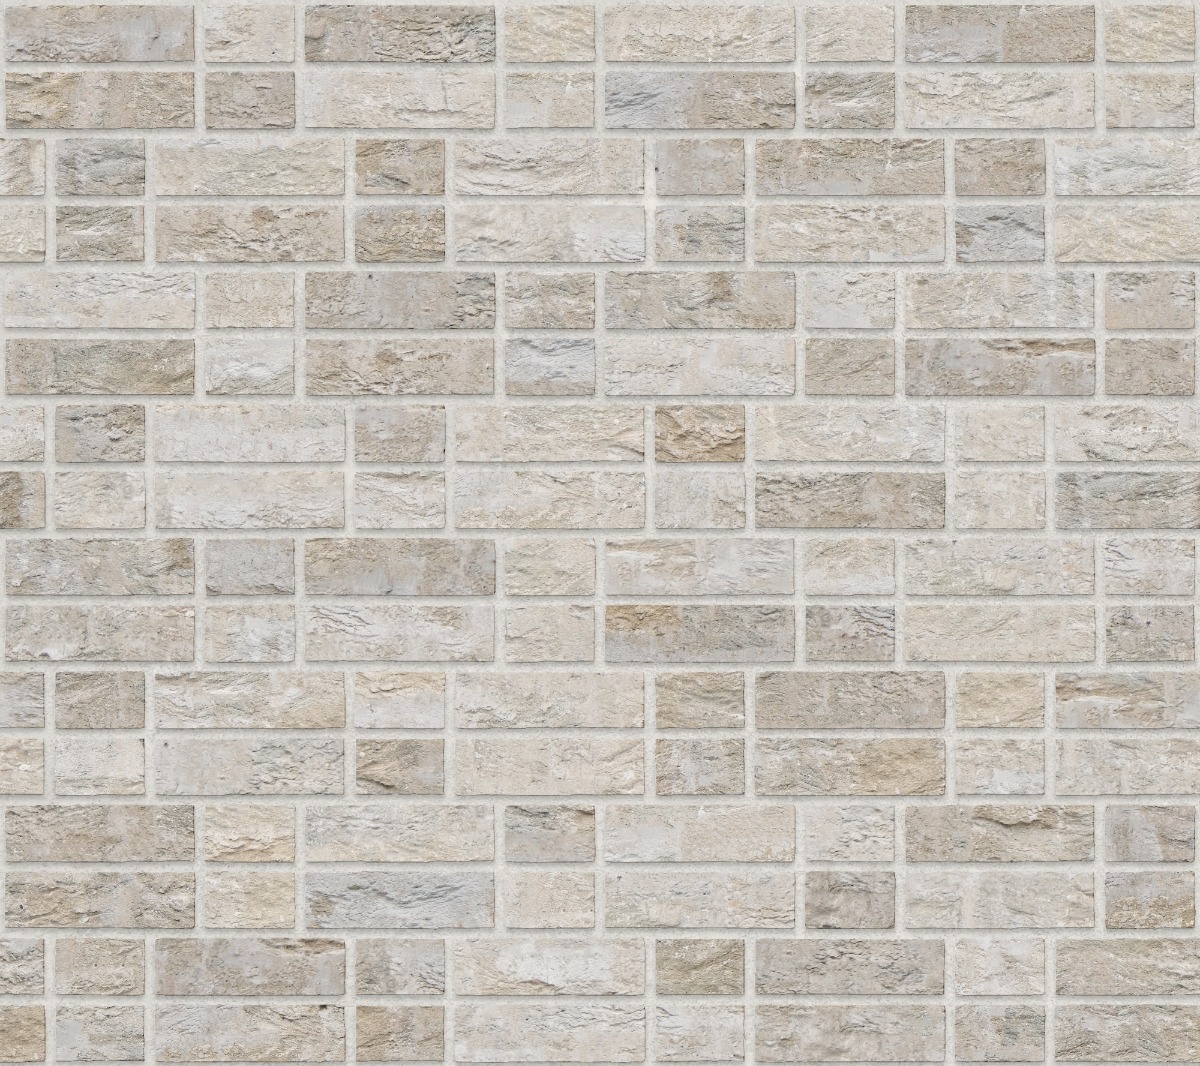 A seamless brick texture with buff units arranged in a Double Flemish pattern